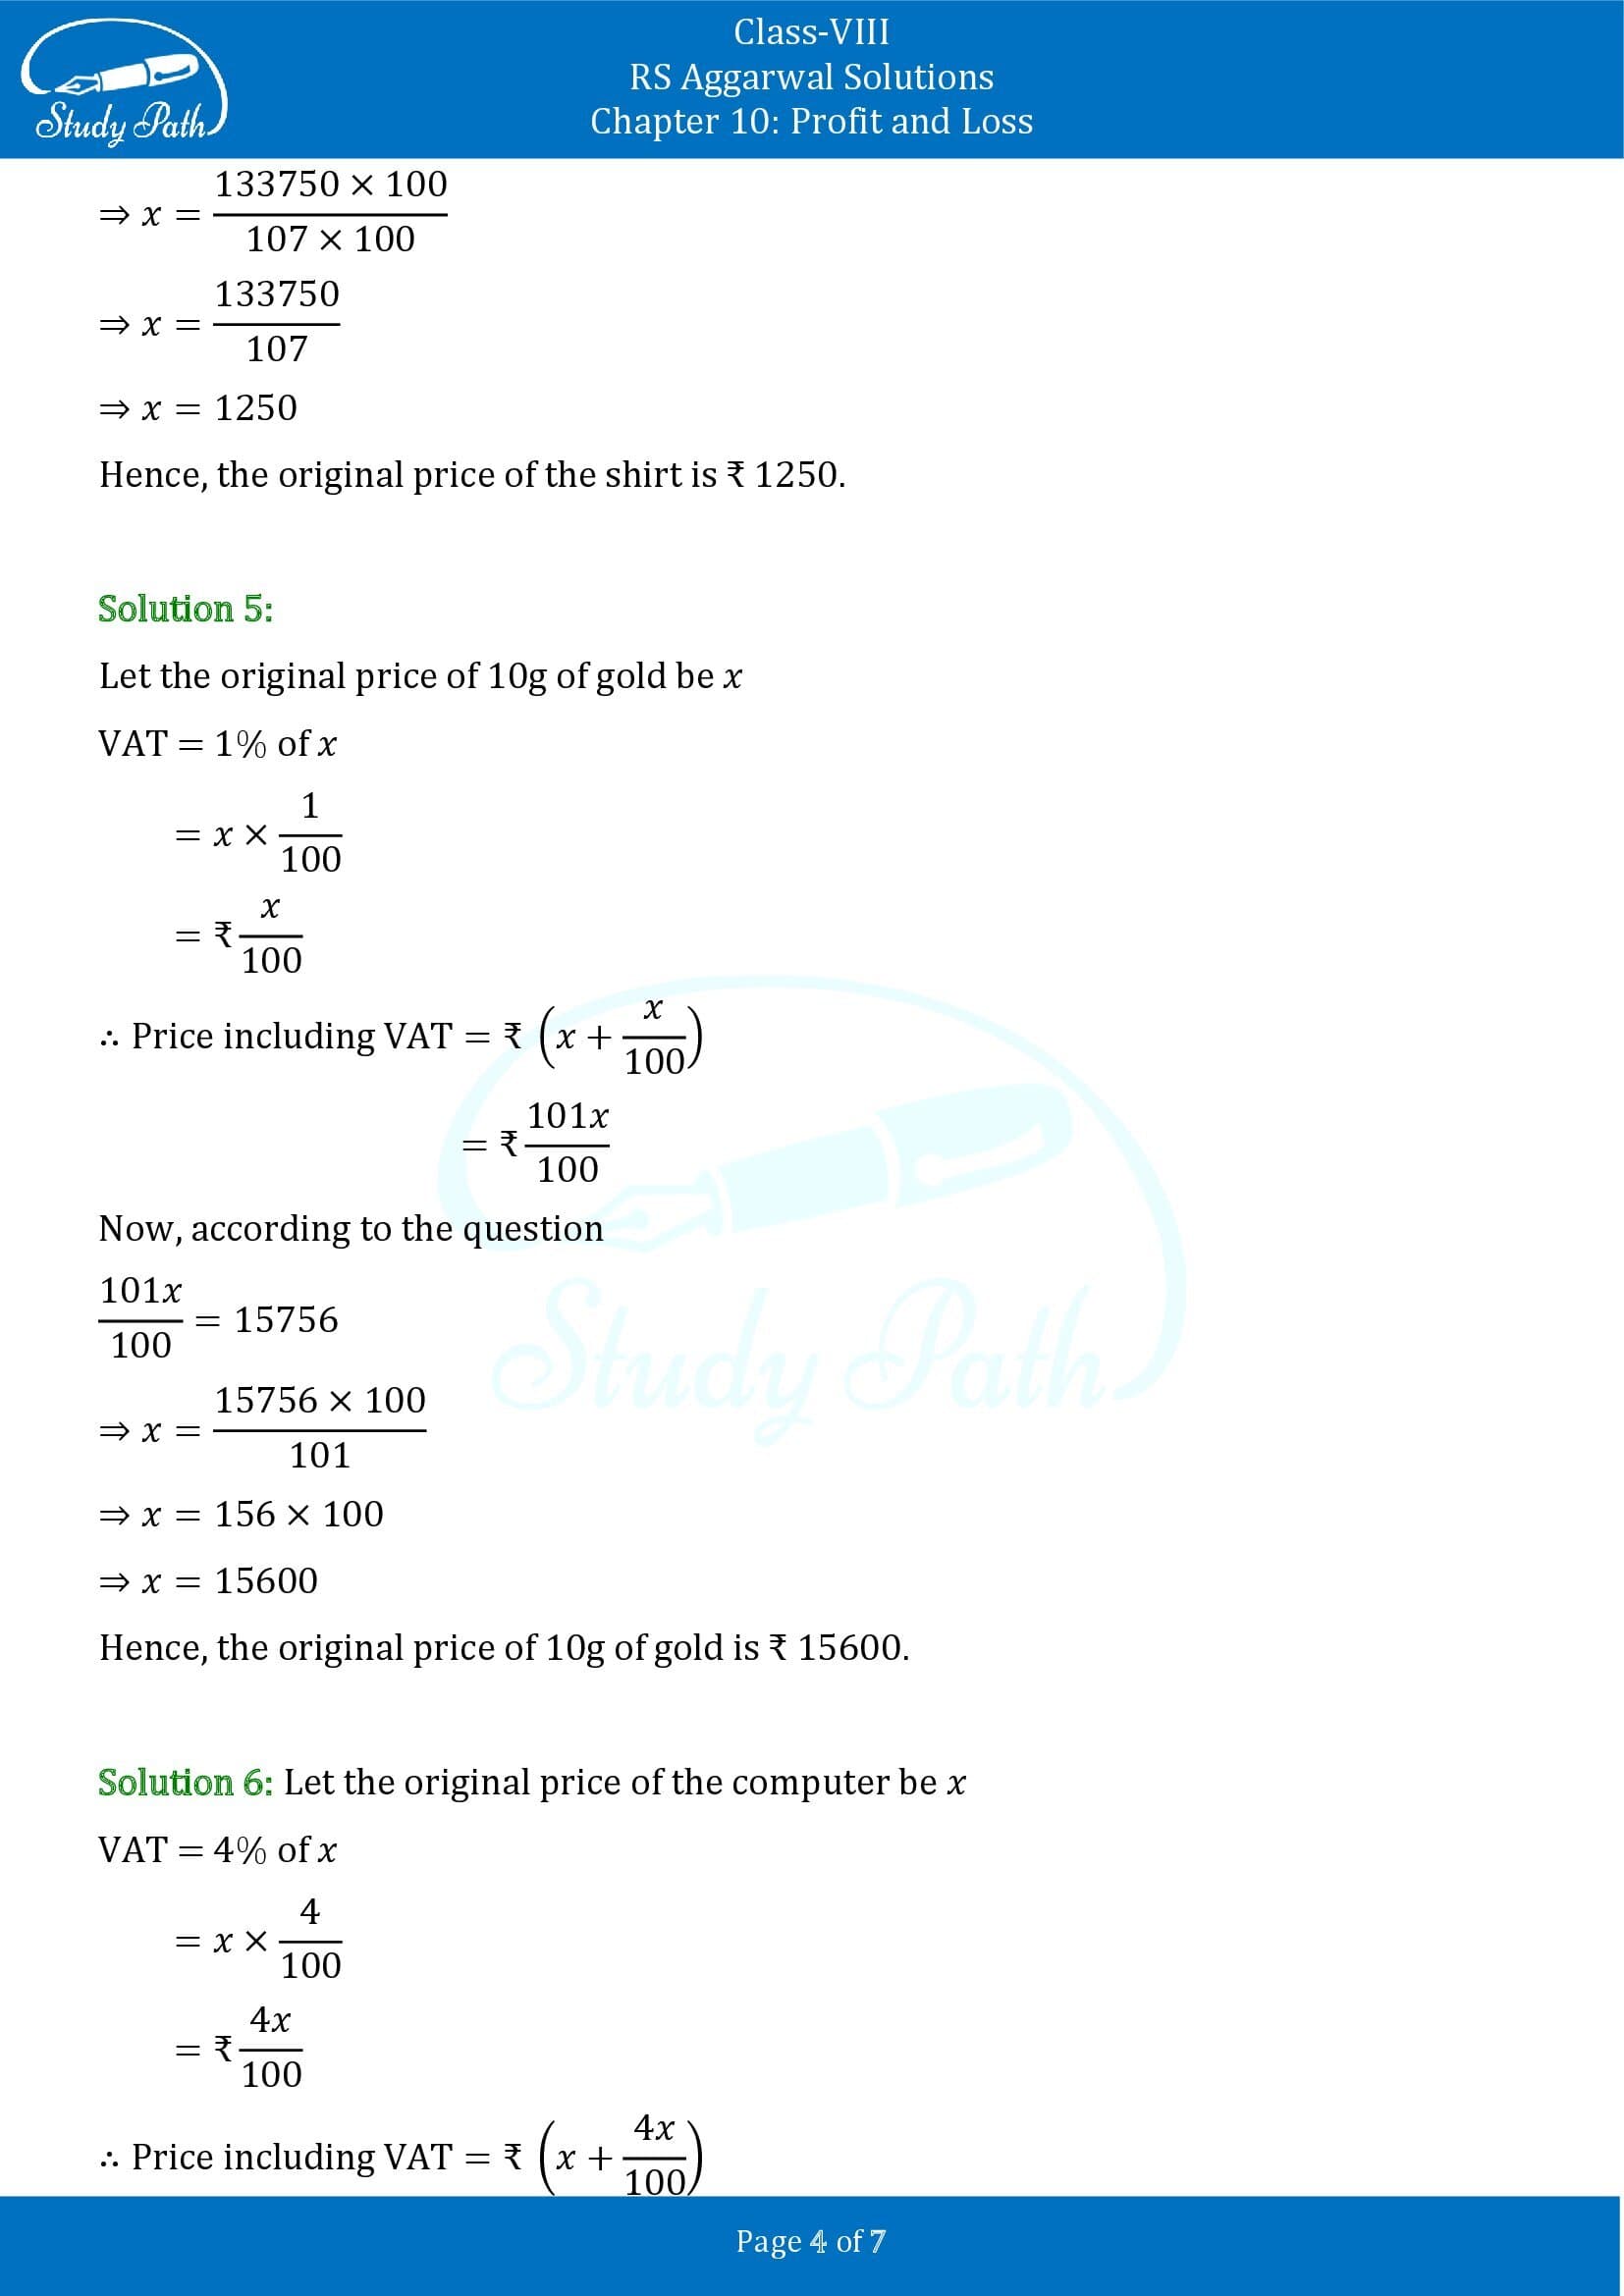 RS Aggarwal Solutions Class 8 Chapter 10 Profit and Loss Exercise 10C 0004